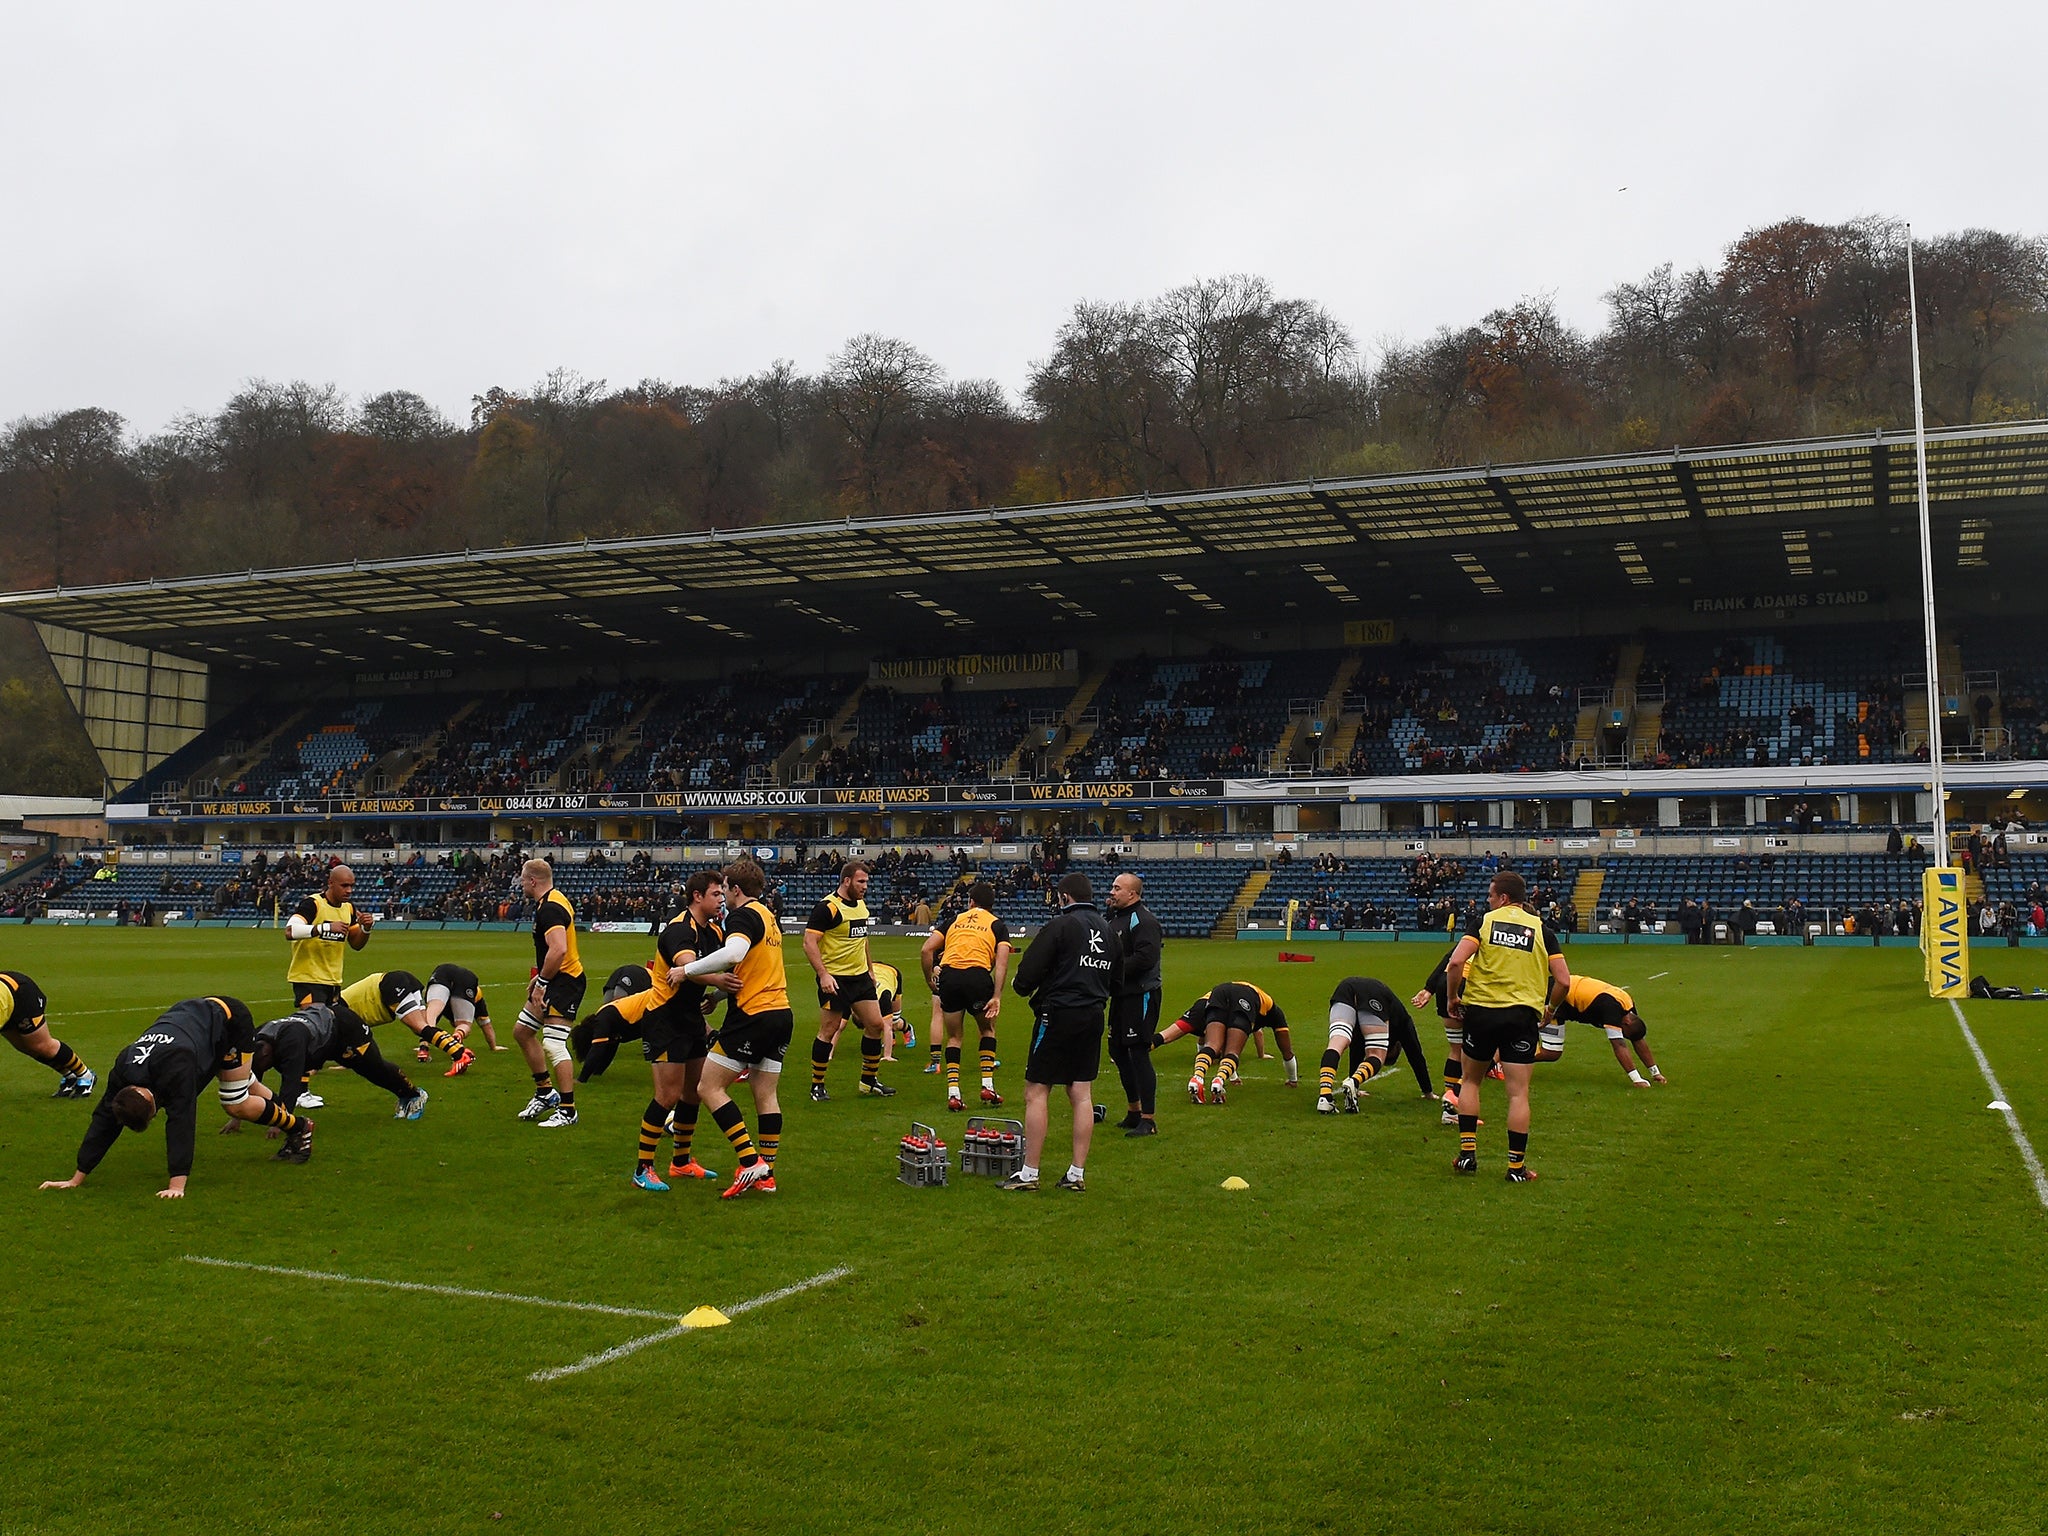 Wasps play their last match at Adams Park before moving to Coventry